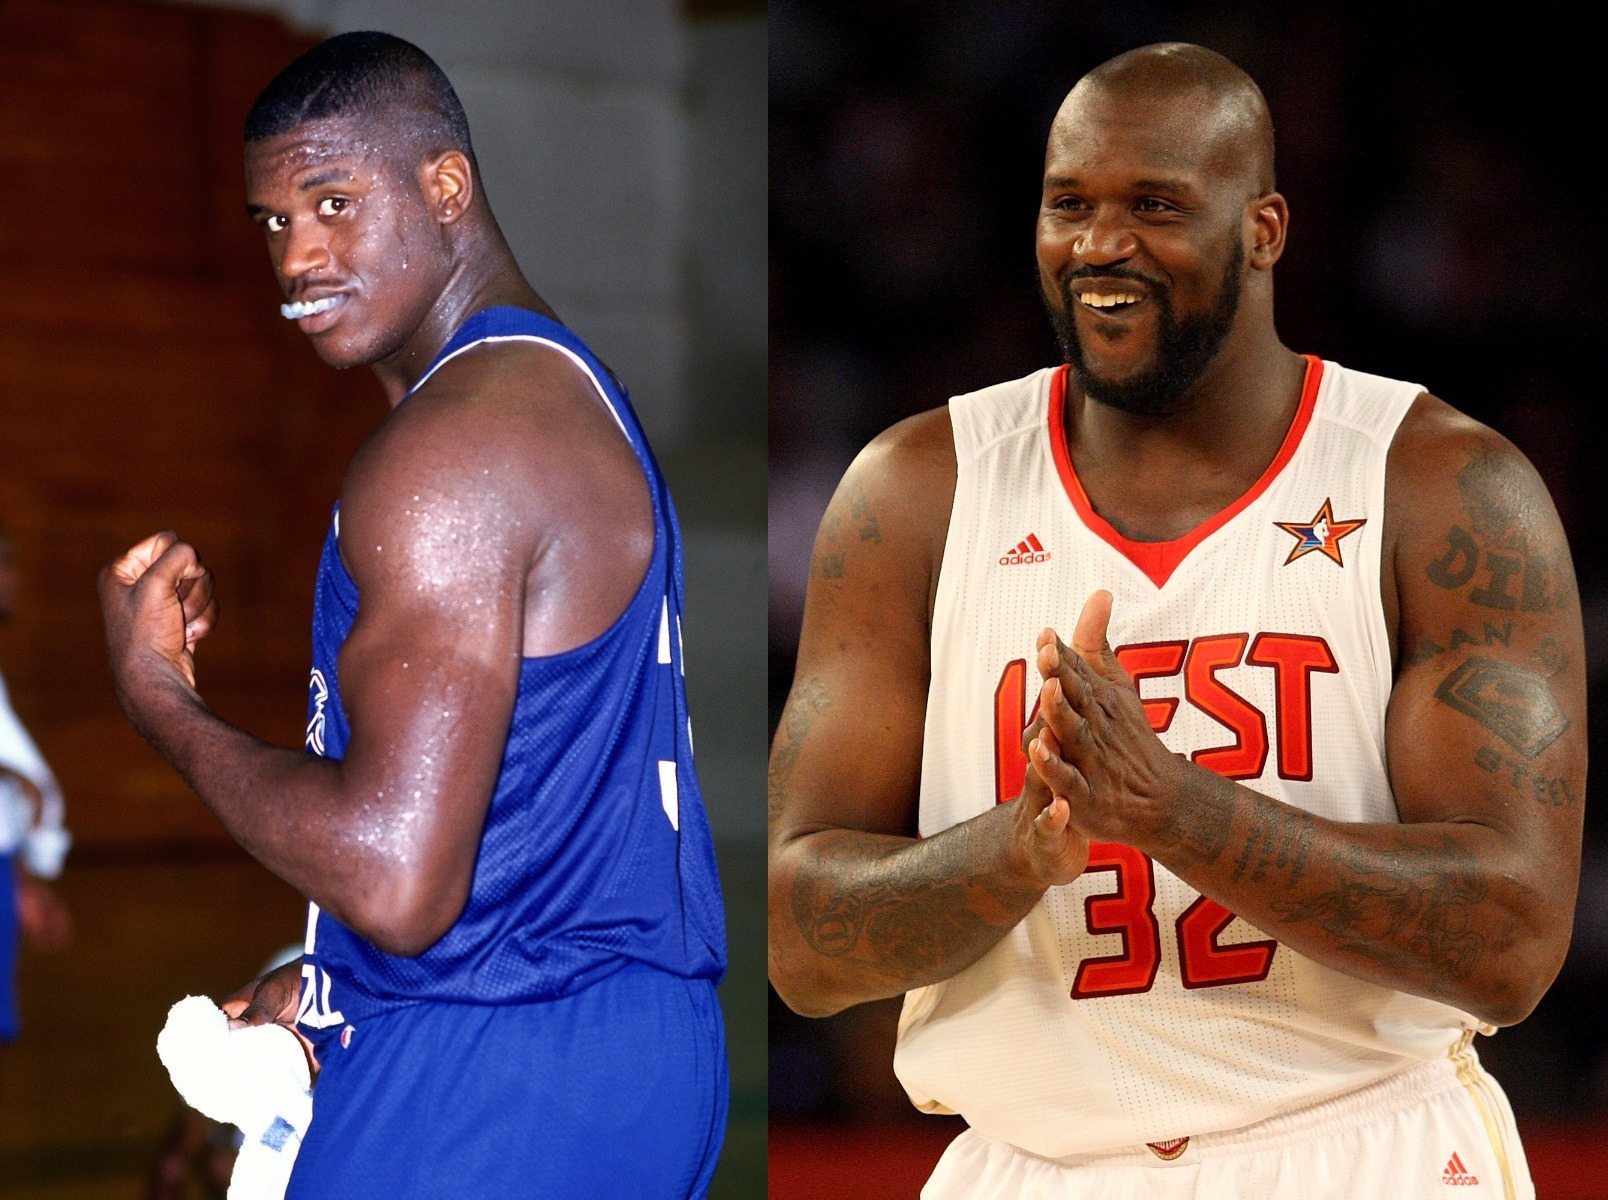 In his debut season, Shaq’s weight was an estimated 230 lb. 